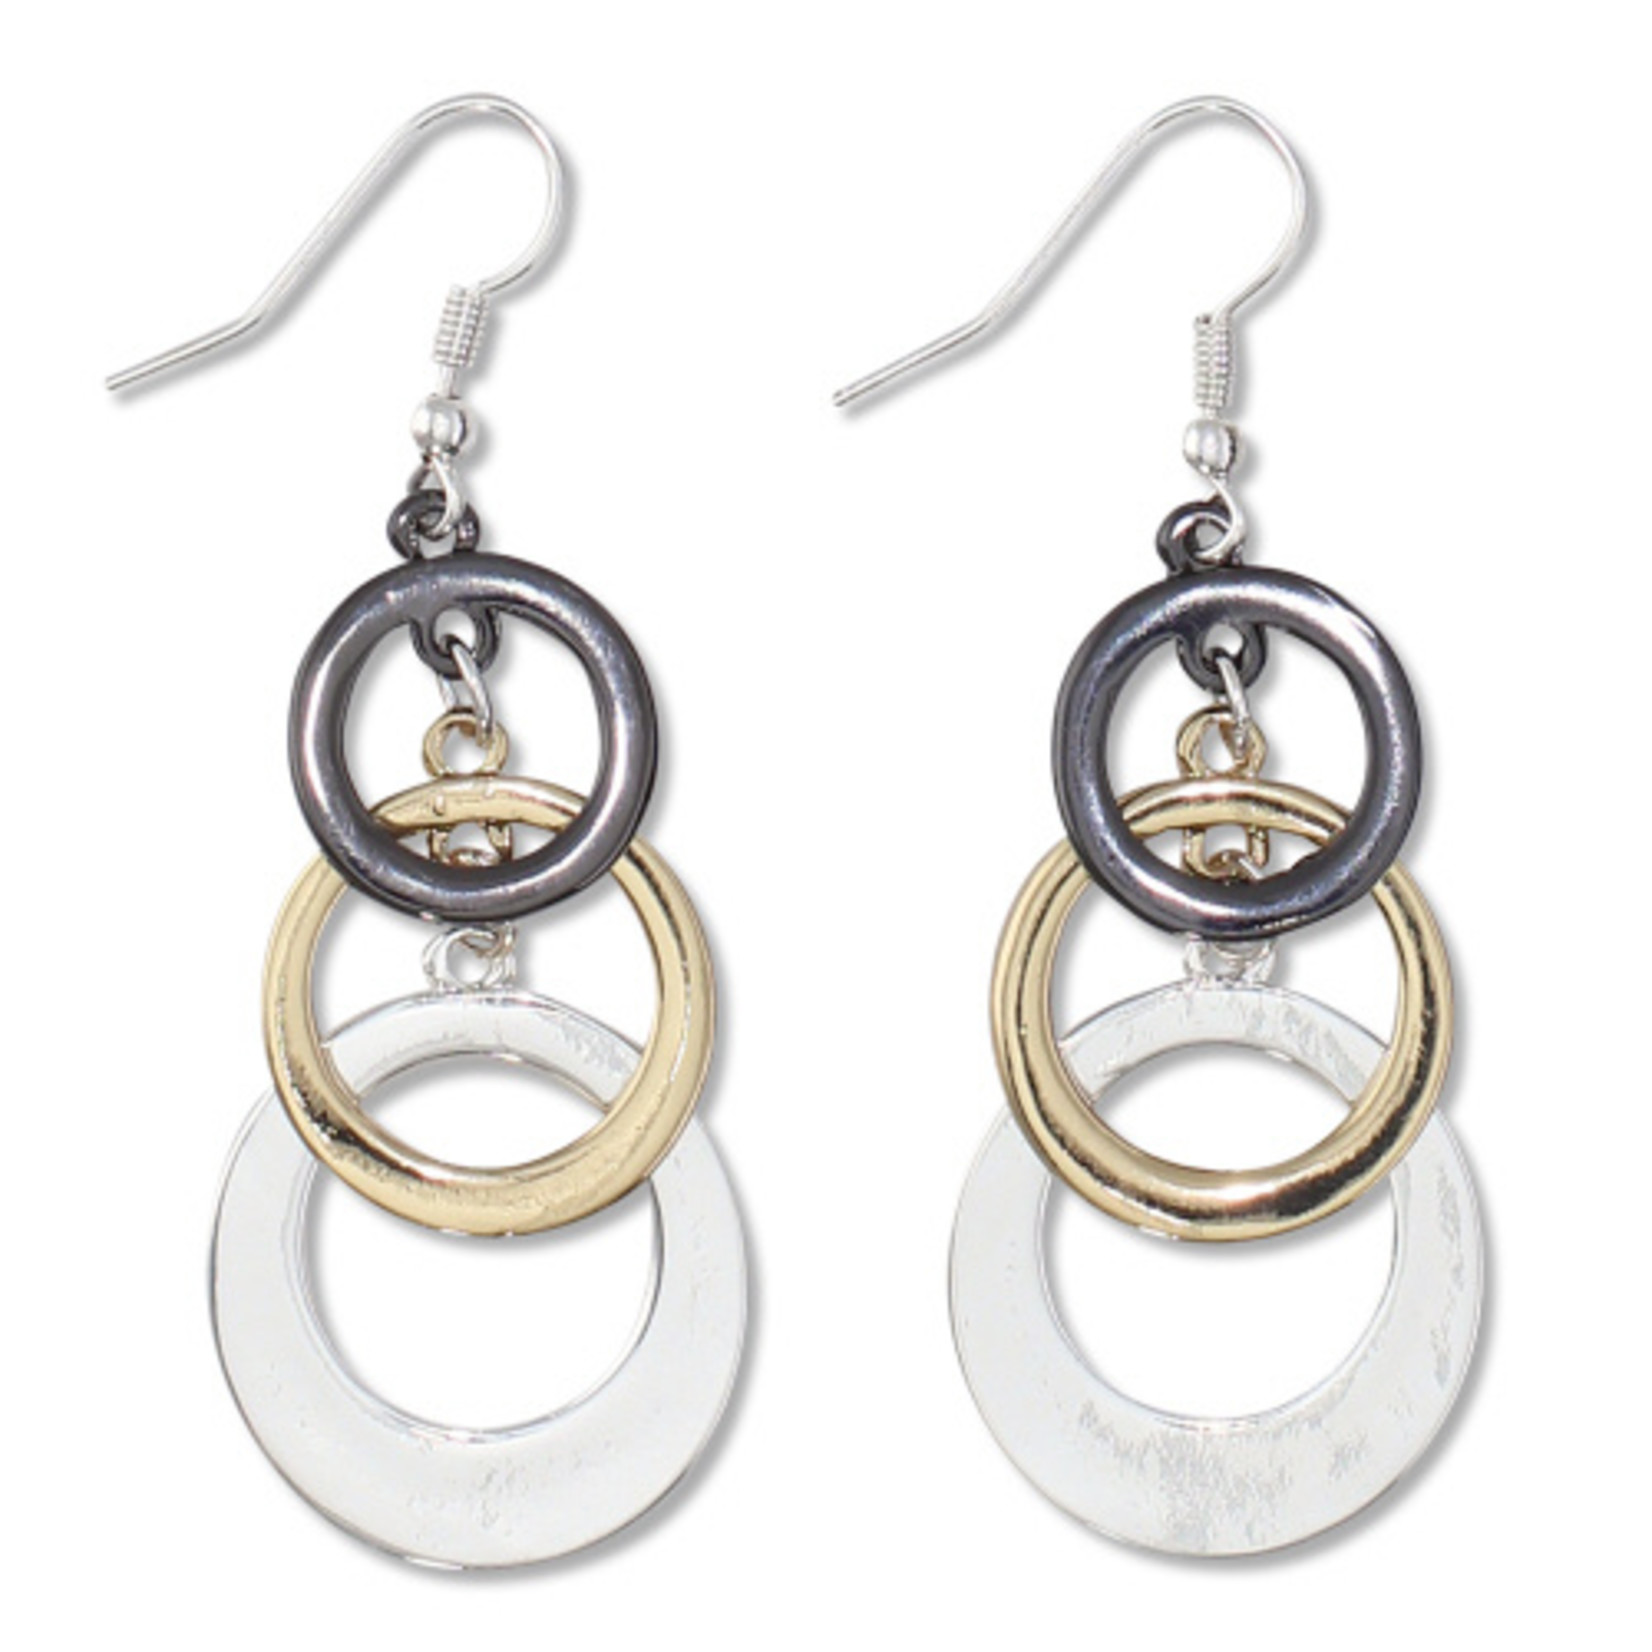 Periwinkle Periwinkle - Earrings - Tri-Tone Cascading Circles